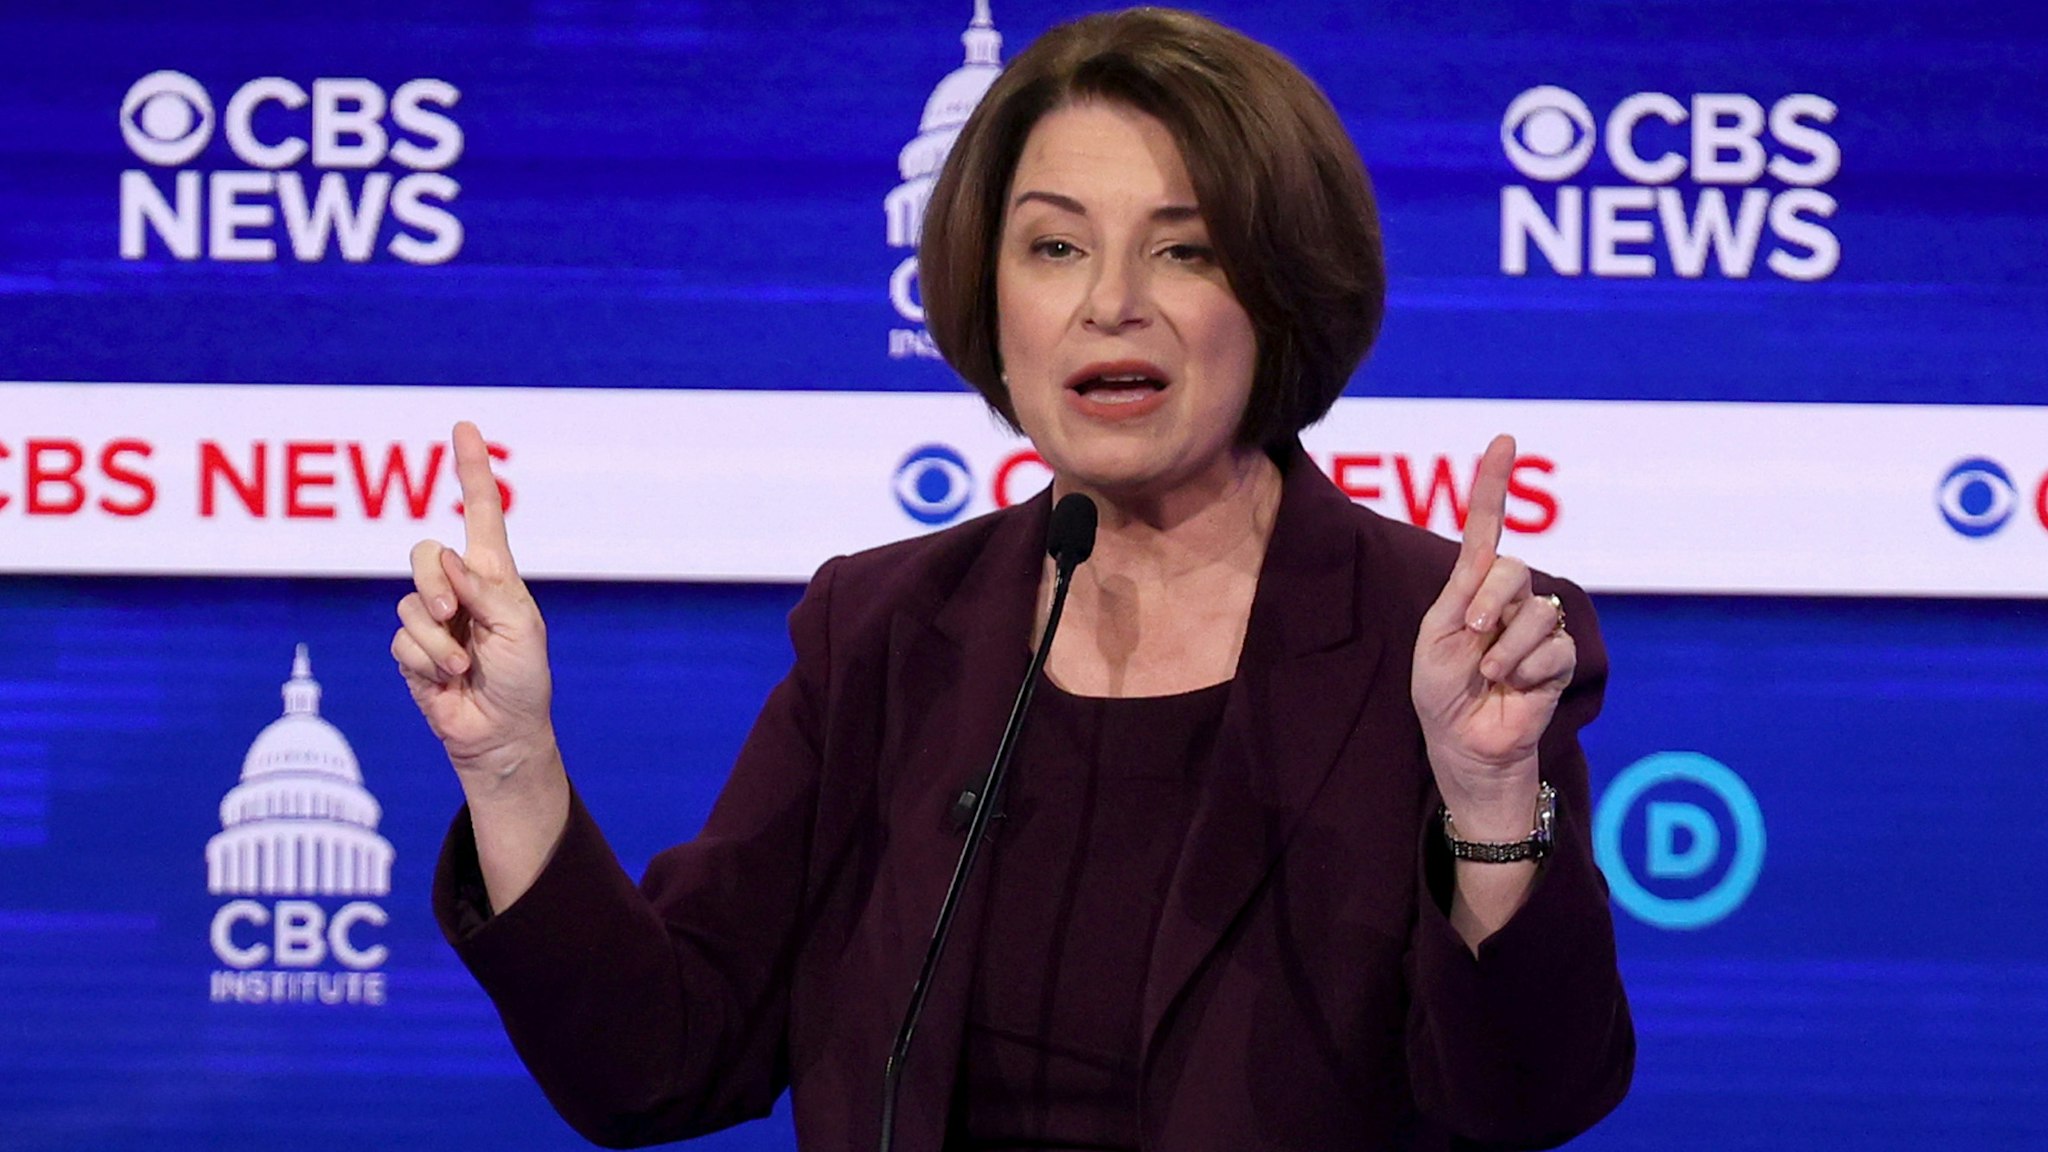 CHARLESTON, SOUTH CAROLINA - FEBRUARY 25: Sen. Amy Klobuchar (D-MN) speaks during the Democratic presidential primary debate at the Charleston Gaillard Center on February 25, 2020 in Charleston, South Carolina. Seven candidates qualified for the debate, hosted by CBS News and Congressional Black Caucus Institute, ahead of South Carolina’s primary in four days.